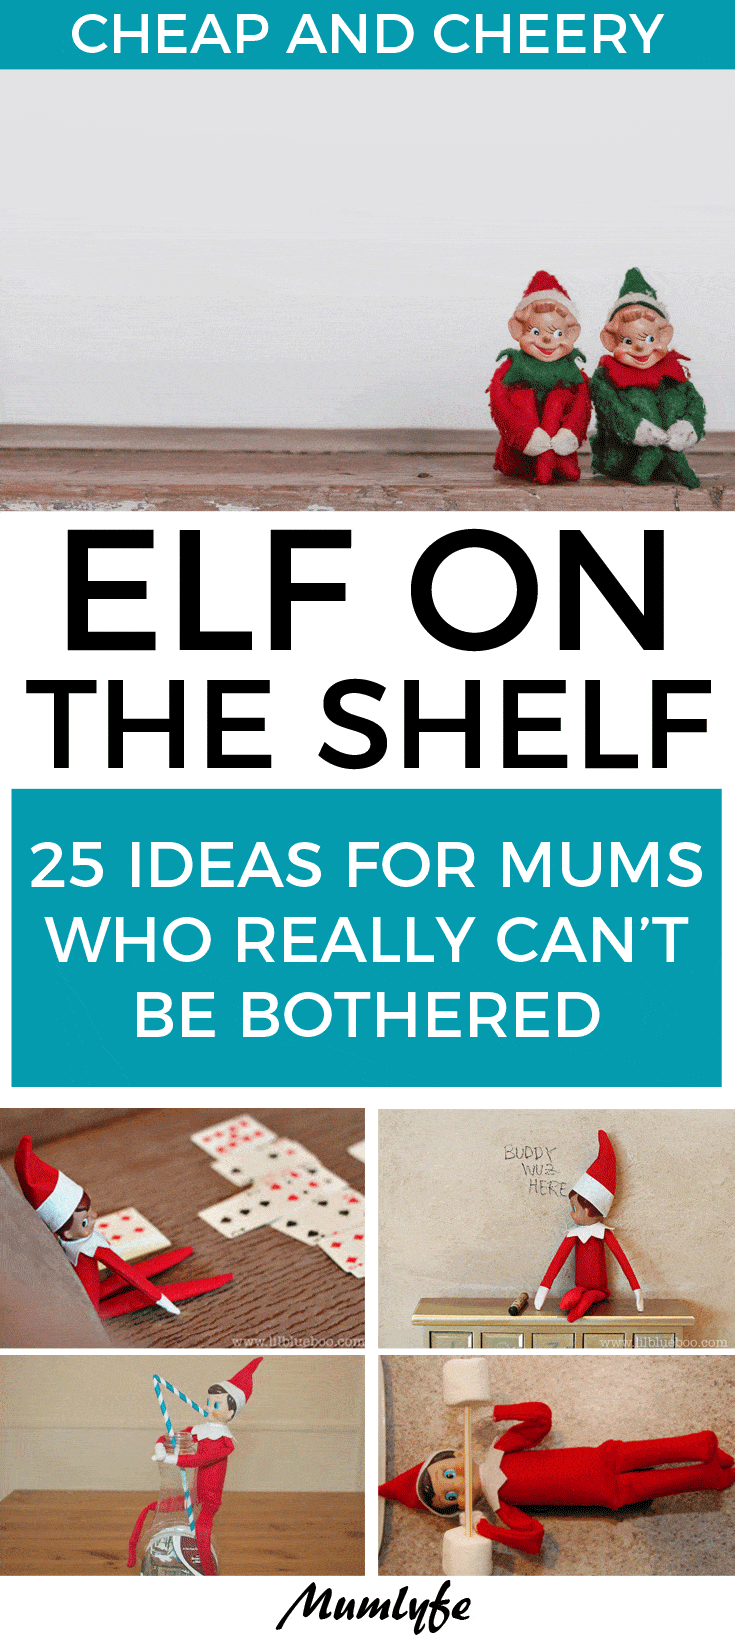 25 Elf on the Shelf ideas for mums who really can't be bothered